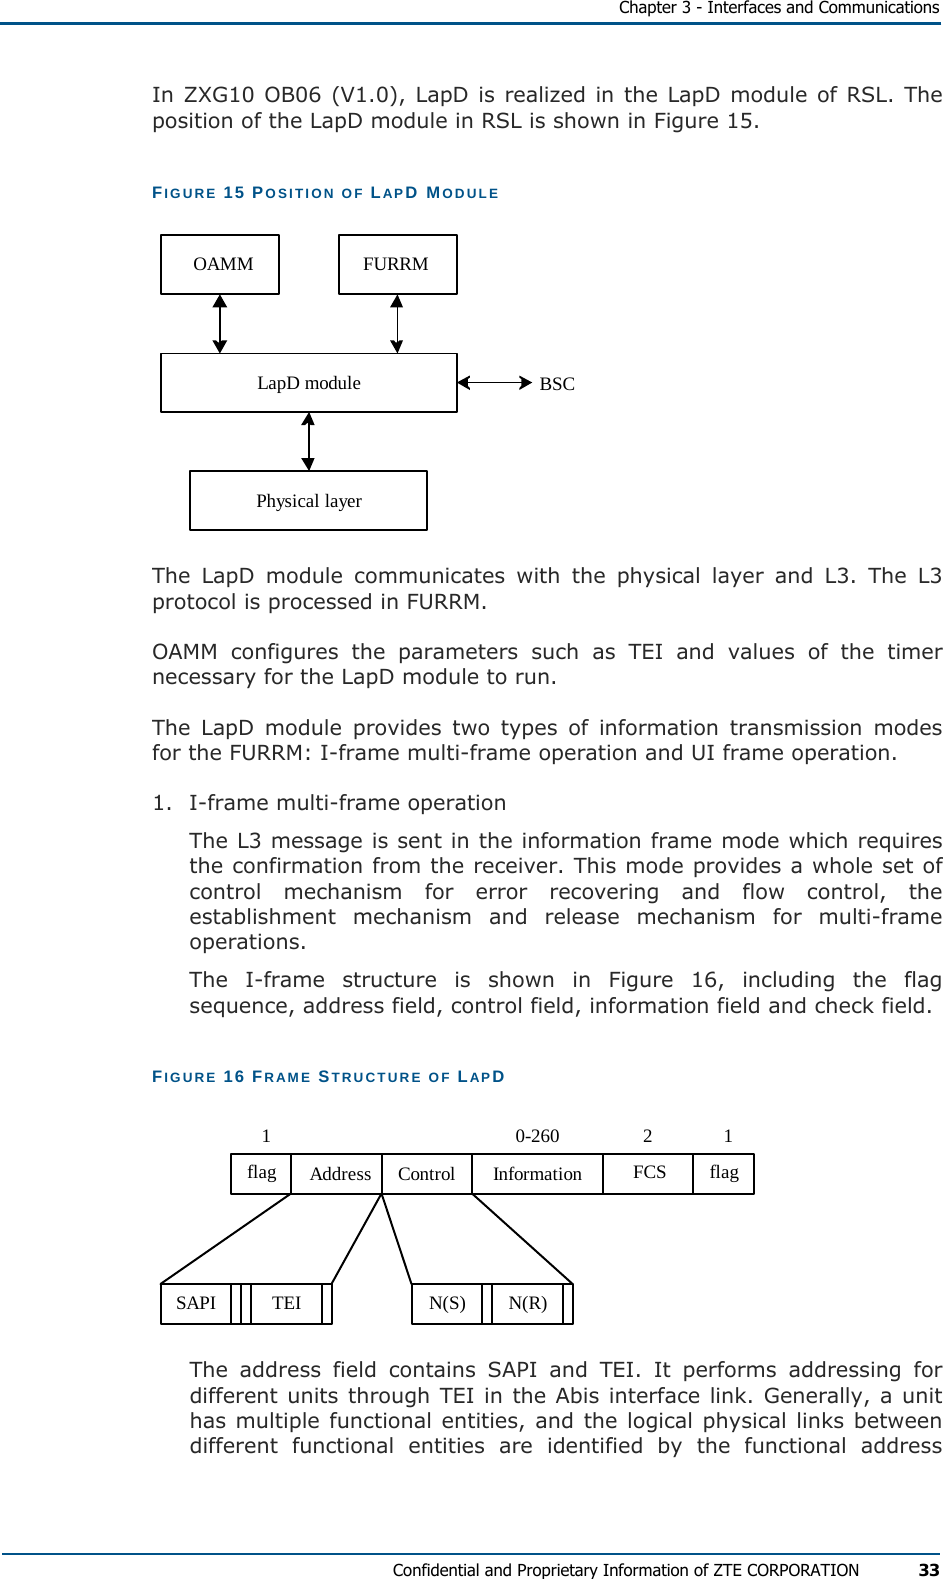   Chapter 3 - Interfaces and Communications Confidential and Proprietary Information of ZTE CORPORATION 33 In ZXG10 OB06 (V1.0), LapD is realized in the LapD module of RSL. The position of the LapD module in RSL is shown in Figure 15. FIGURE 15 POSITION OF LAPD MODULE LapD moduleOAMM FURRMPhysical layerBSC The LapD module communicates with the physical layer and L3. The L3 protocol is processed in FURRM. OAMM configures the parameters such as TEI and values of the timer necessary for the LapD module to run. The LapD module provides two types of information transmission modes for the FURRM: I-frame multi-frame operation and UI frame operation. 1.  I-frame multi-frame operation The L3 message is sent in the information frame mode which requires the confirmation from the receiver. This mode provides a whole set of control mechanism for error recovering and flow control, the establishment mechanism and release mechanism for multi-frame operations. The I-frame structure is shown in Figure 16, including the flag sequence, address field, control field, information field and check field. FIGURE 16 FRAME STRUCTURE OF LAPD flag Address Control Information FCS flagSAPI TEI N(S) N(R)1 0-260 2 1 The address field contains SAPI and TEI. It performs addressing for different units through TEI in the Abis interface link. Generally, a unit has multiple functional entities, and the logical physical links between different functional entities are identified by the functional address 